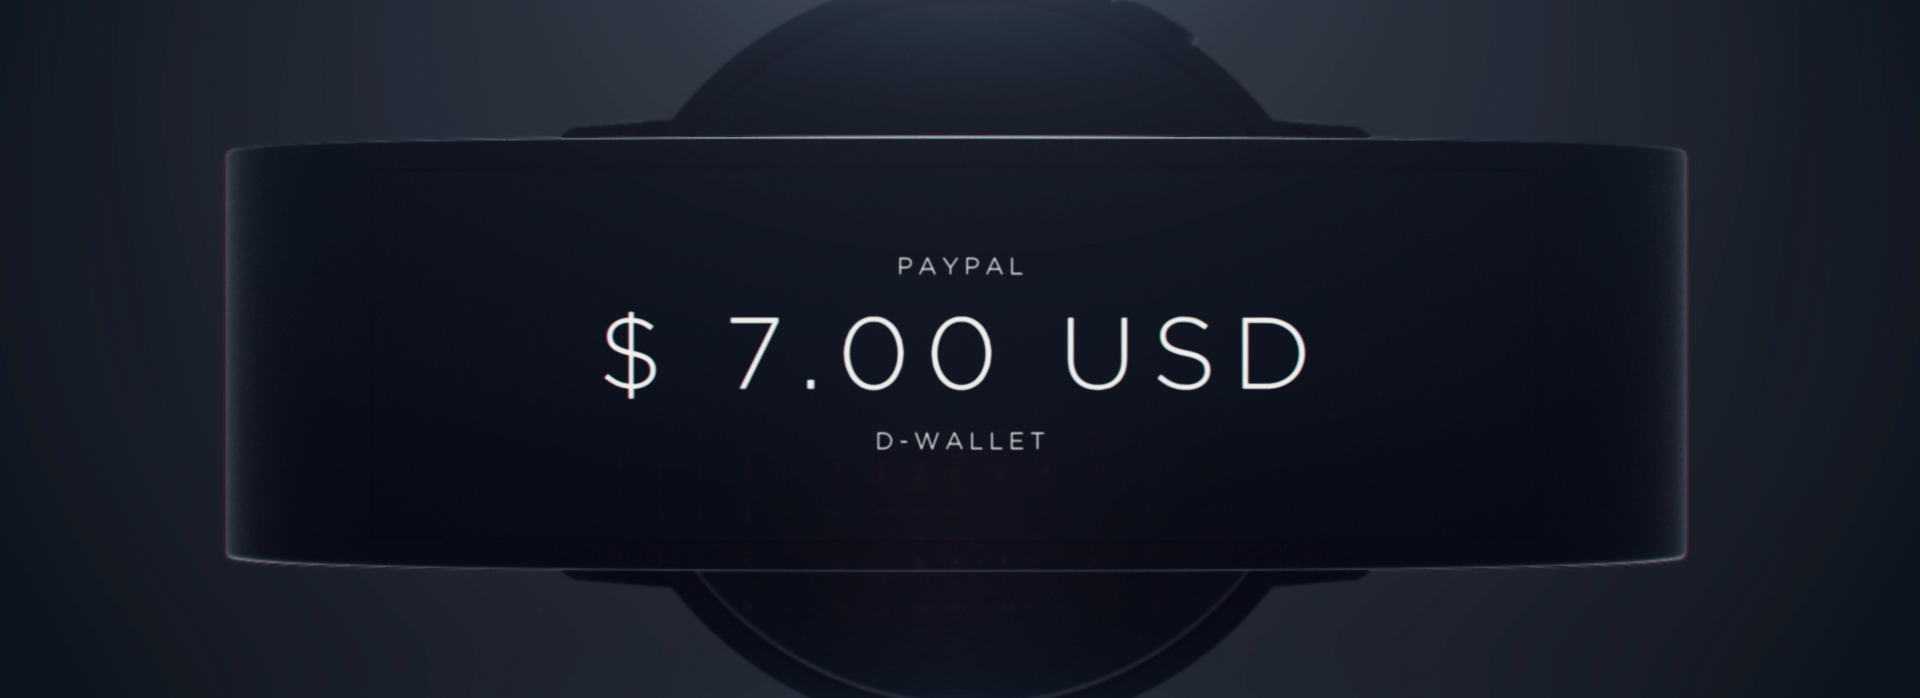 paypal20